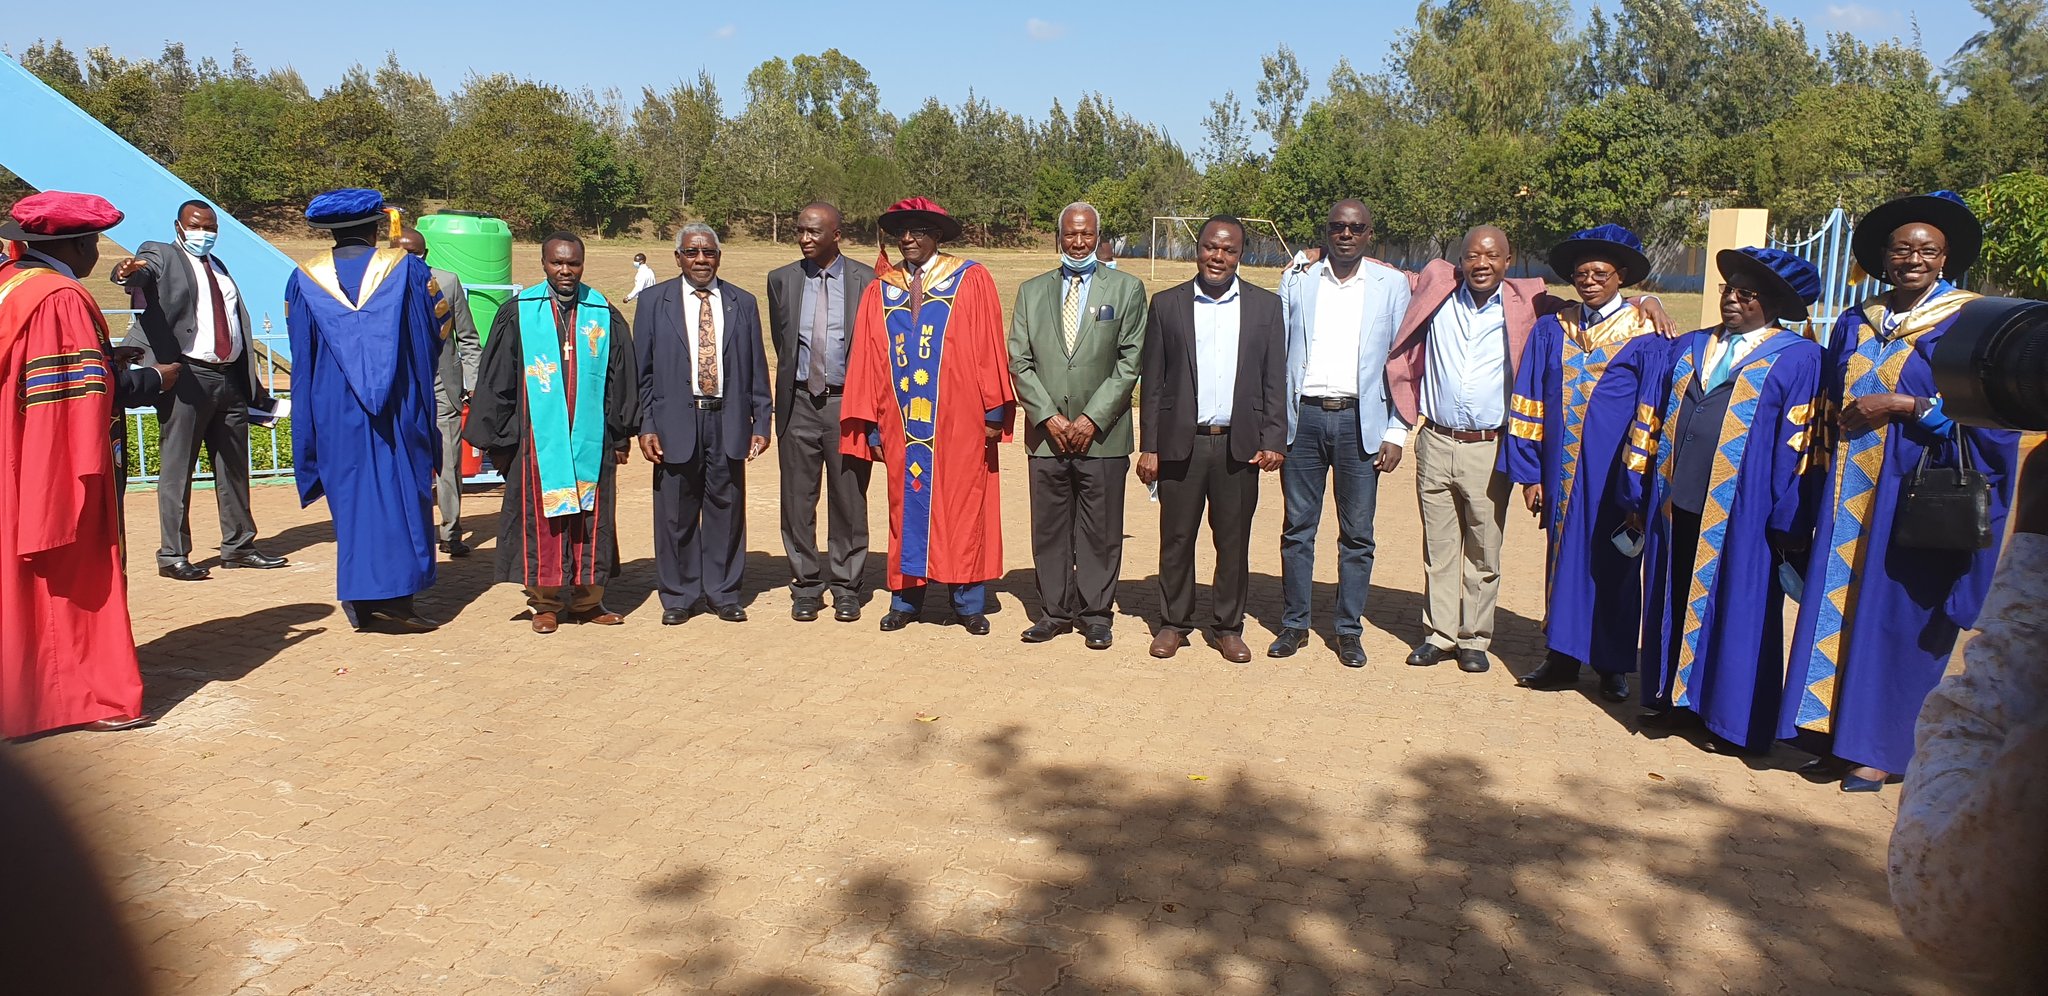 Inauguration of Prof Deogratius Jaganyi as the 2nd Vice Chancellor of Mt. Kenya University in Thika